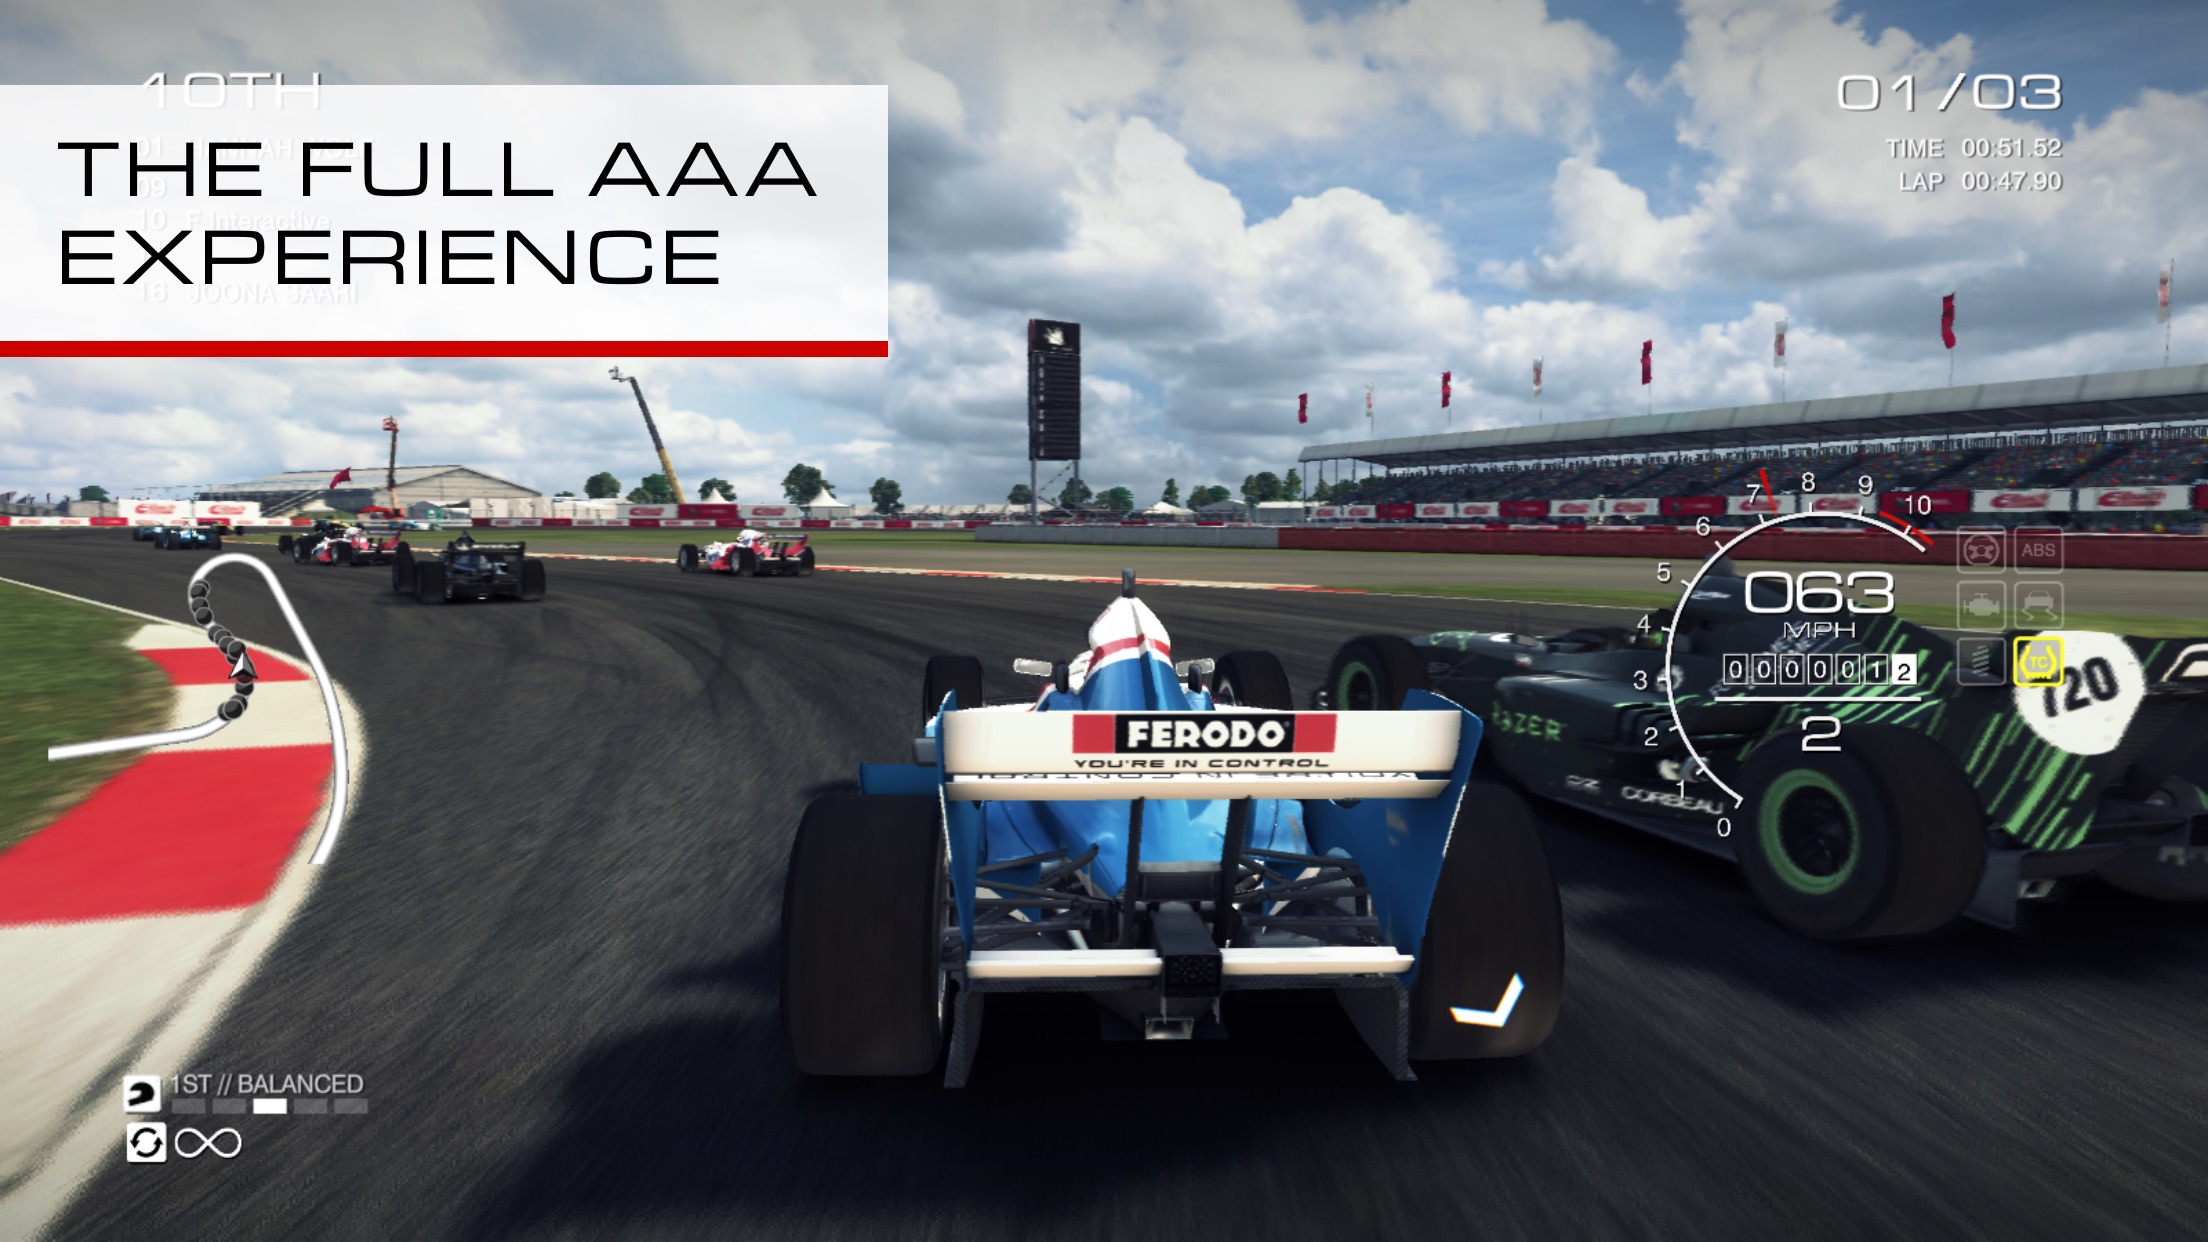 Feral Interactive on X: Android racers! To be notified when GRID